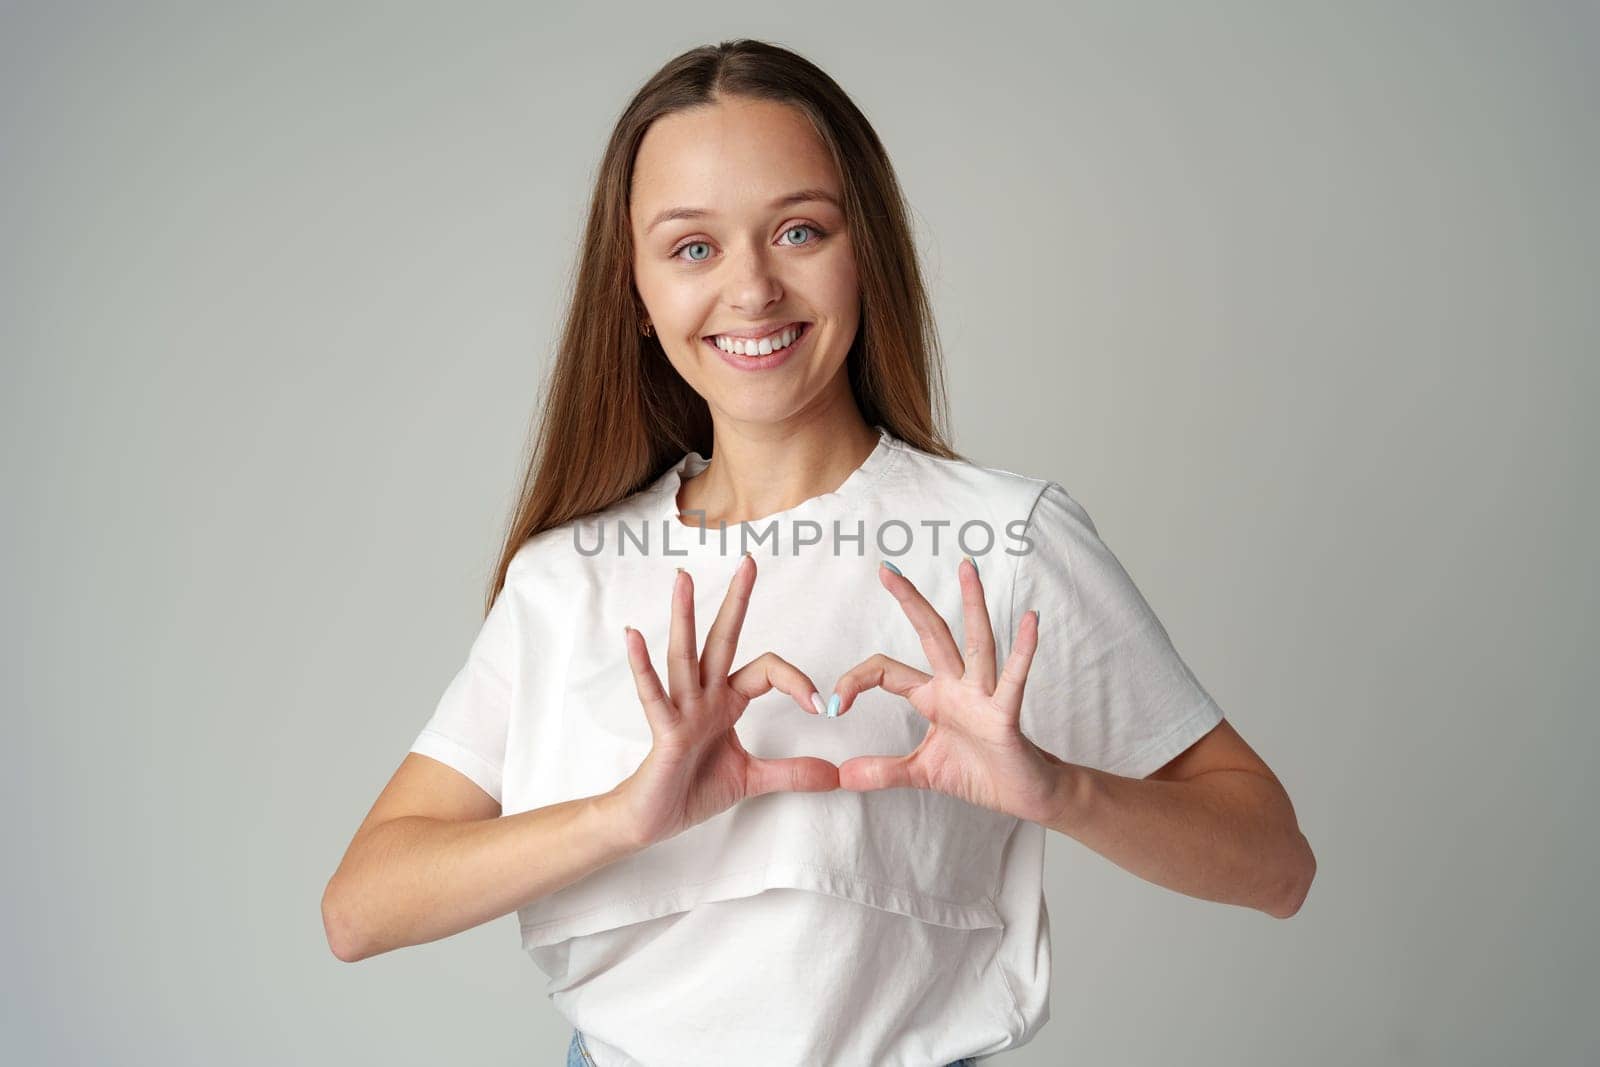 Smiling young woman showing heart sign with hands on gray background close up